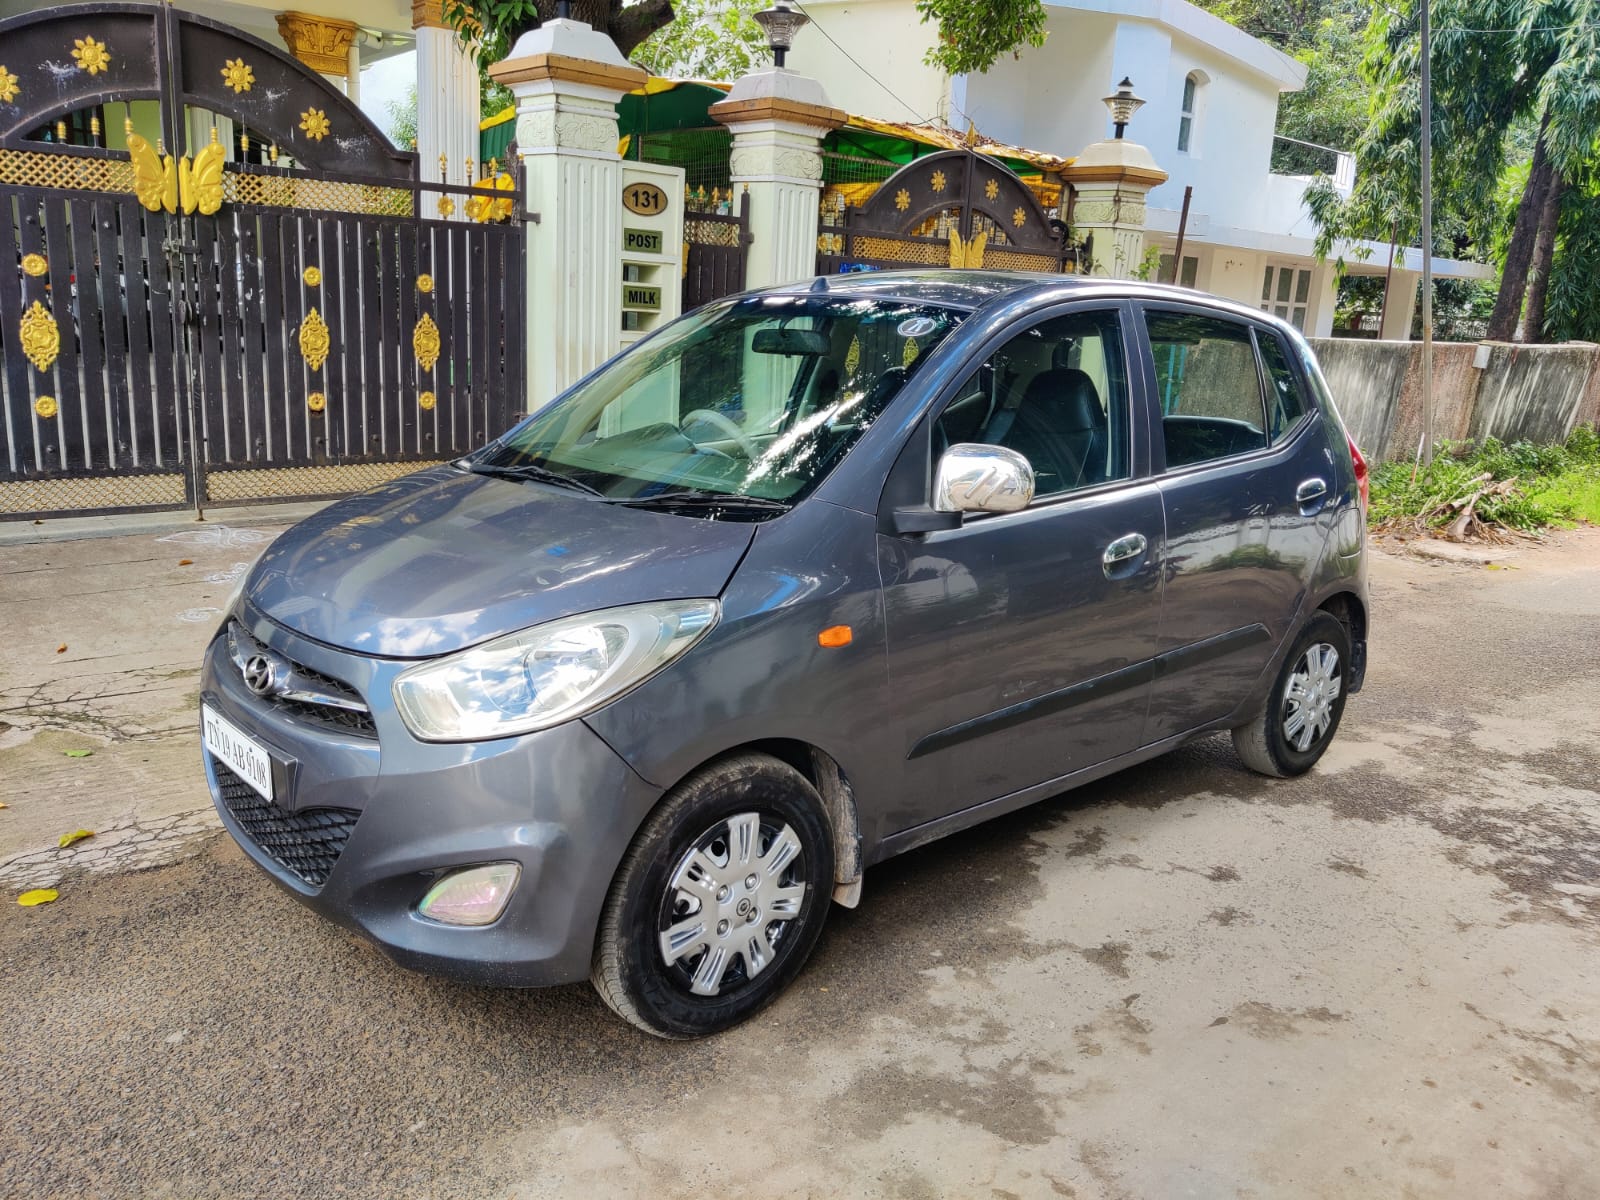 5147-for-sale-Hyundai-i10-Petrol-Second-Owner-2016-TN-registered-rs-310000